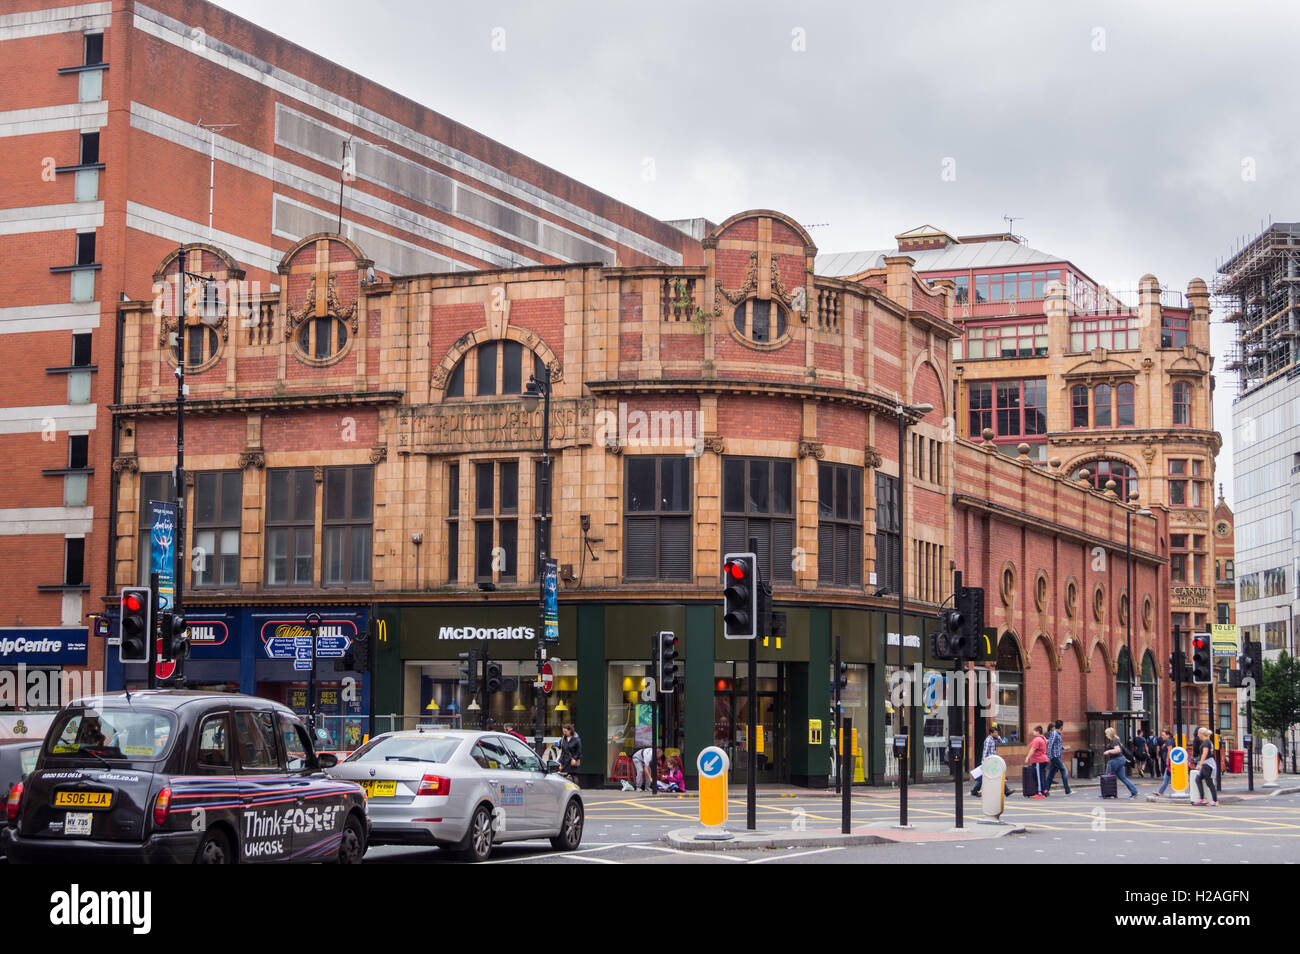 Picturehouse cinema, by Naylor & Sale, 1911, now McDonalds restaurant, Oxford Street, Manchester, England Stock Photo